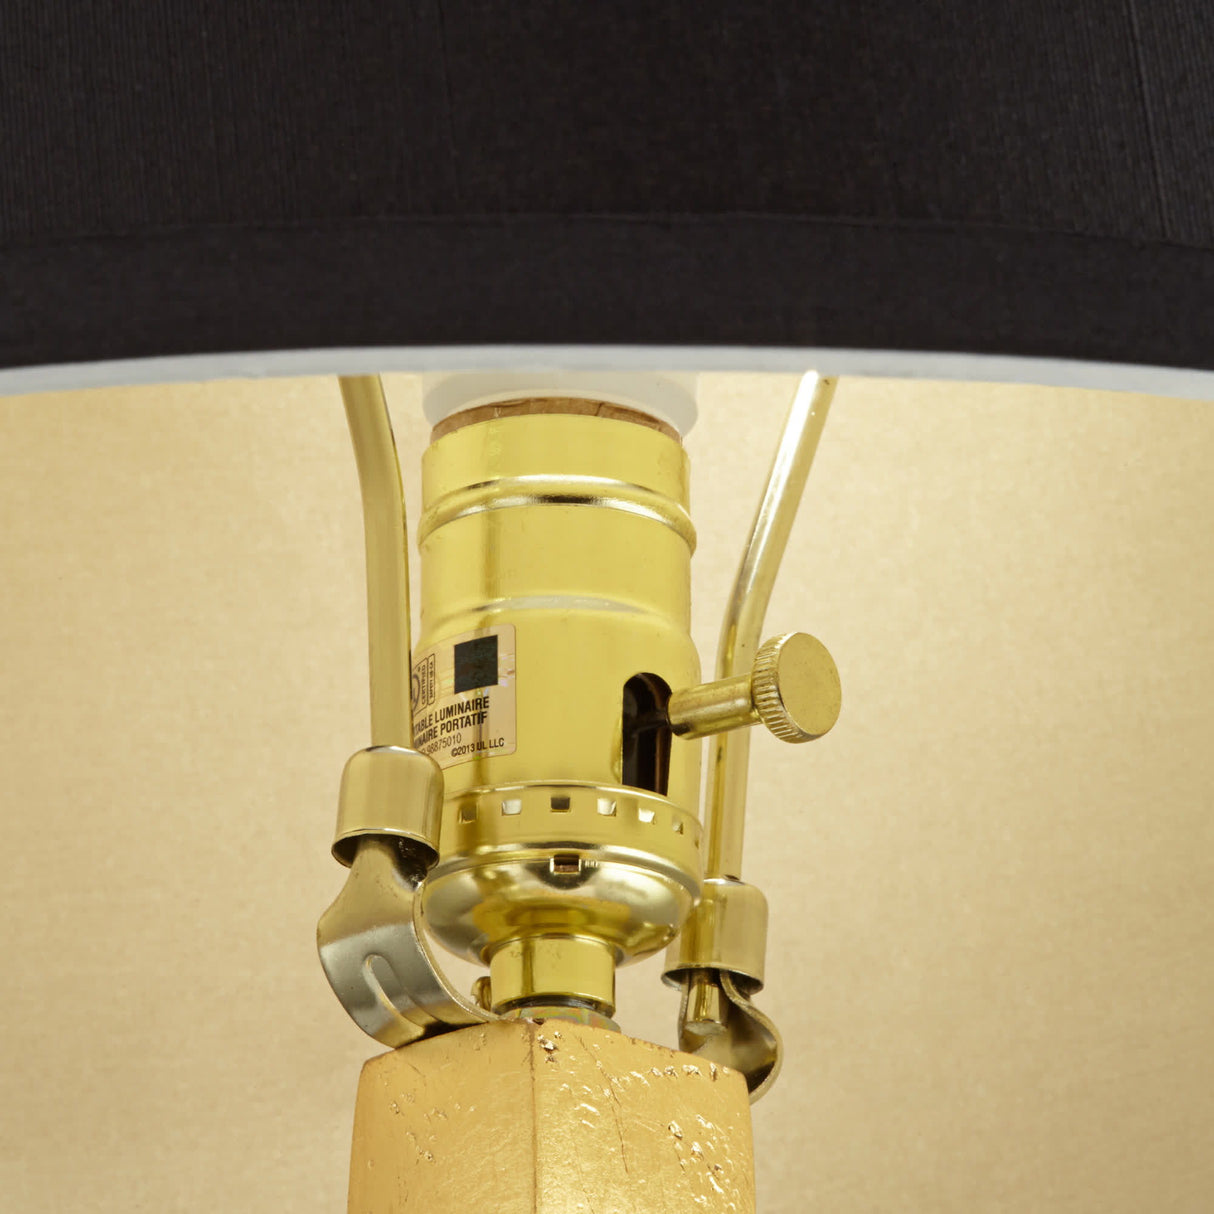 Vienna - Table Lamp - 38" - Gold Leaf